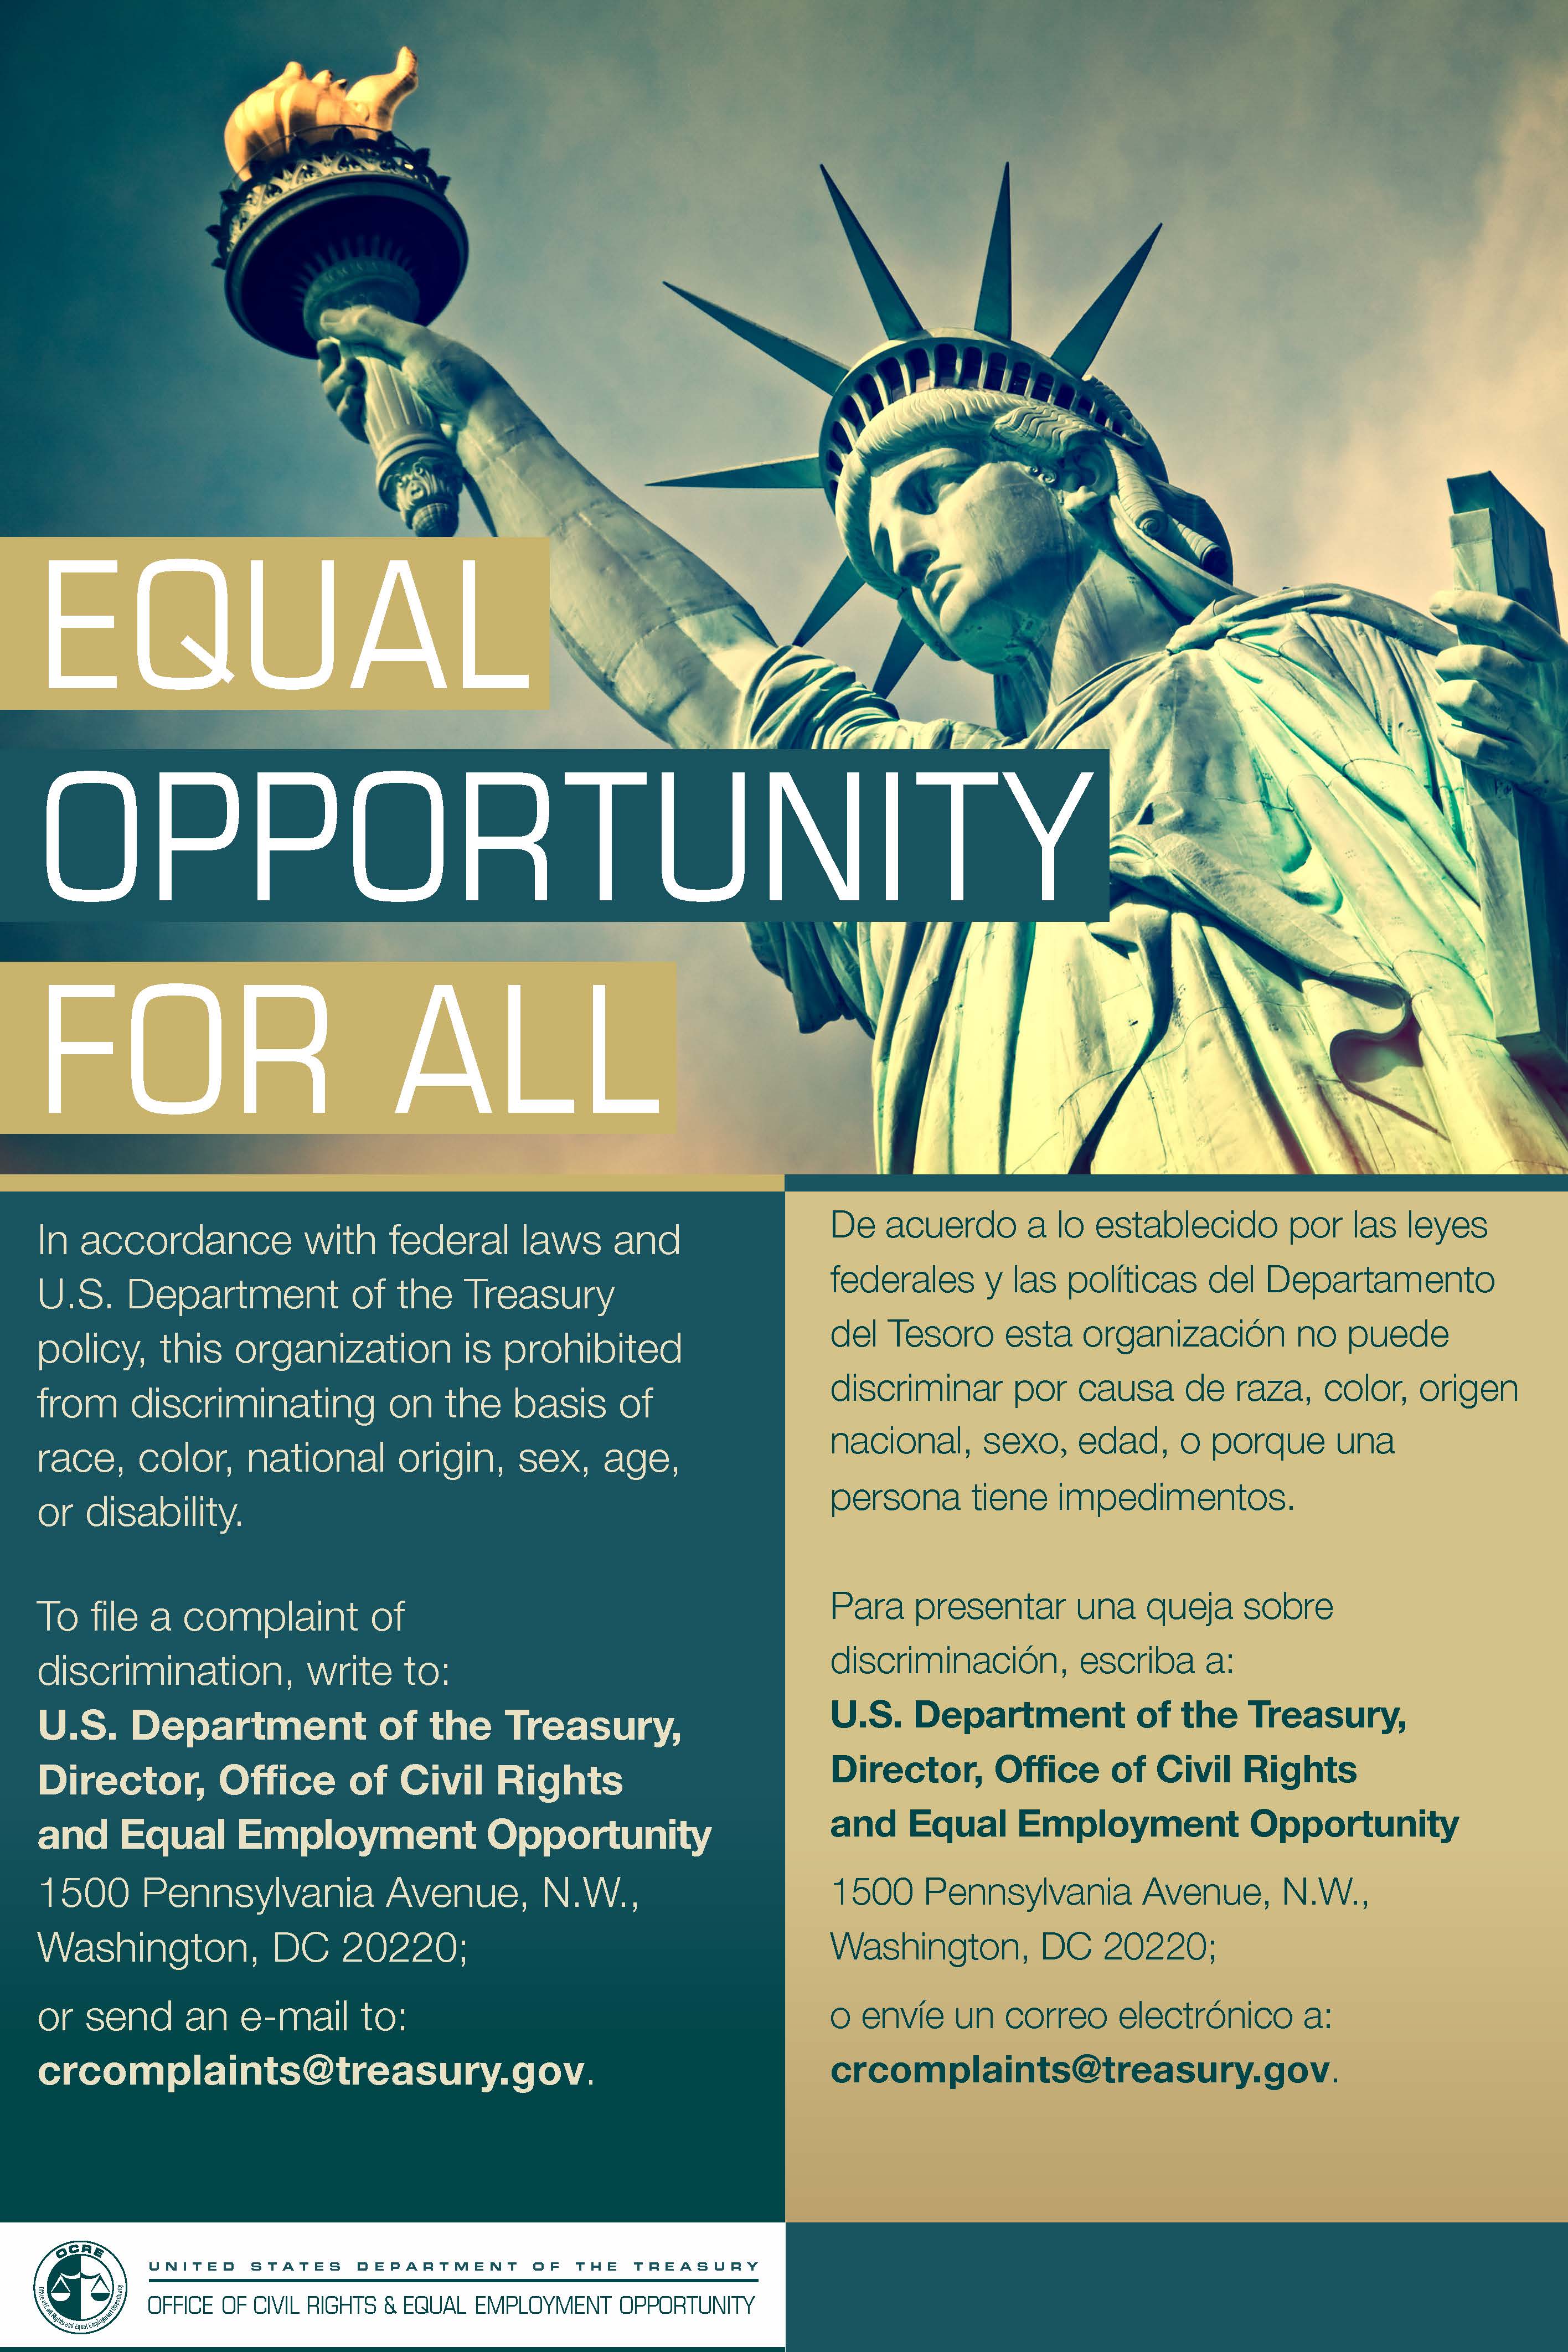 Equal Opportunity For All.